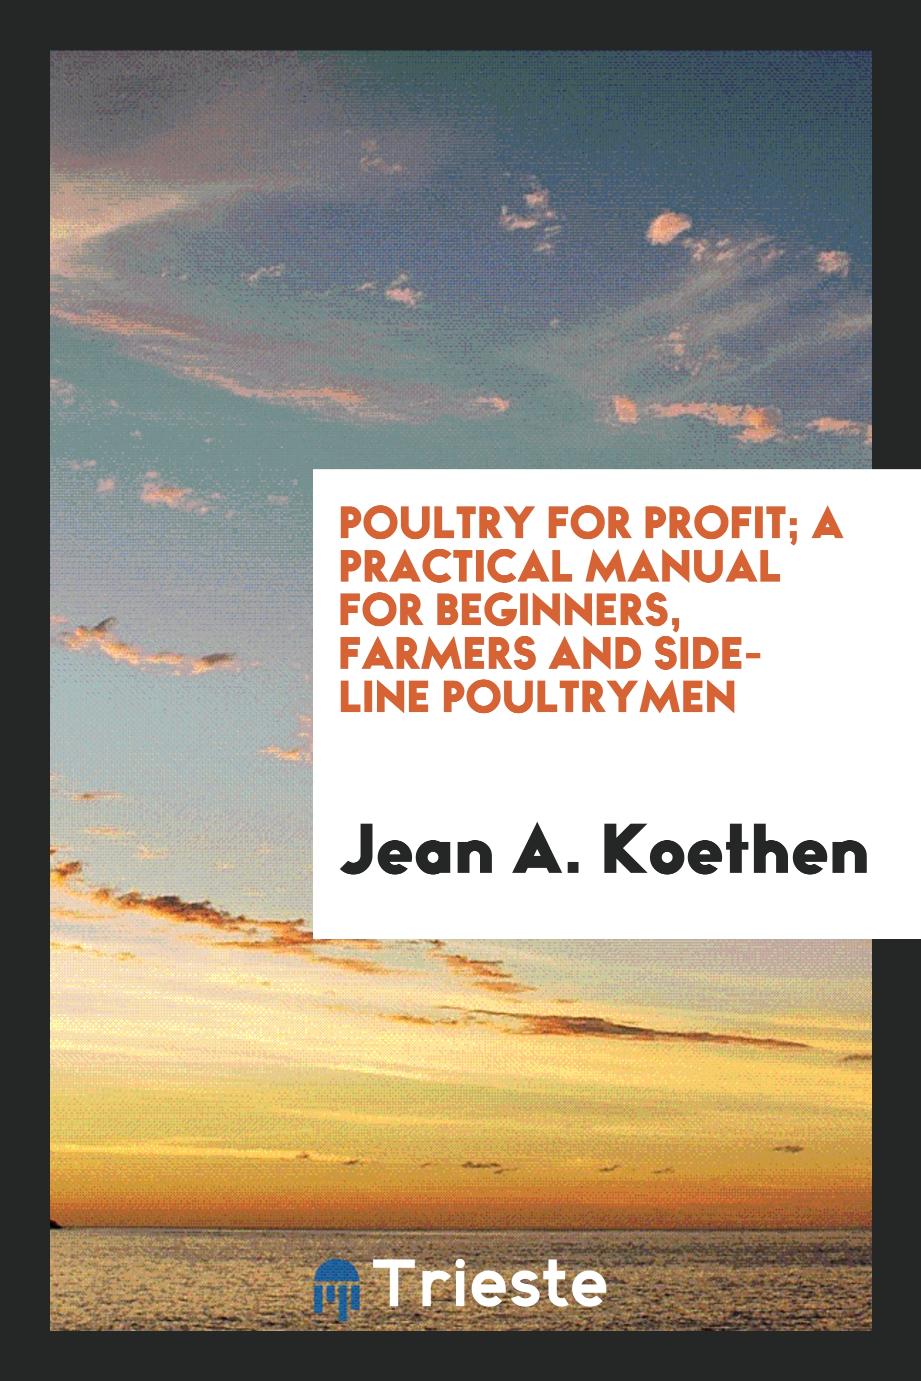 Poultry for profit; a practical manual for beginners, farmers and side-line poultrymen